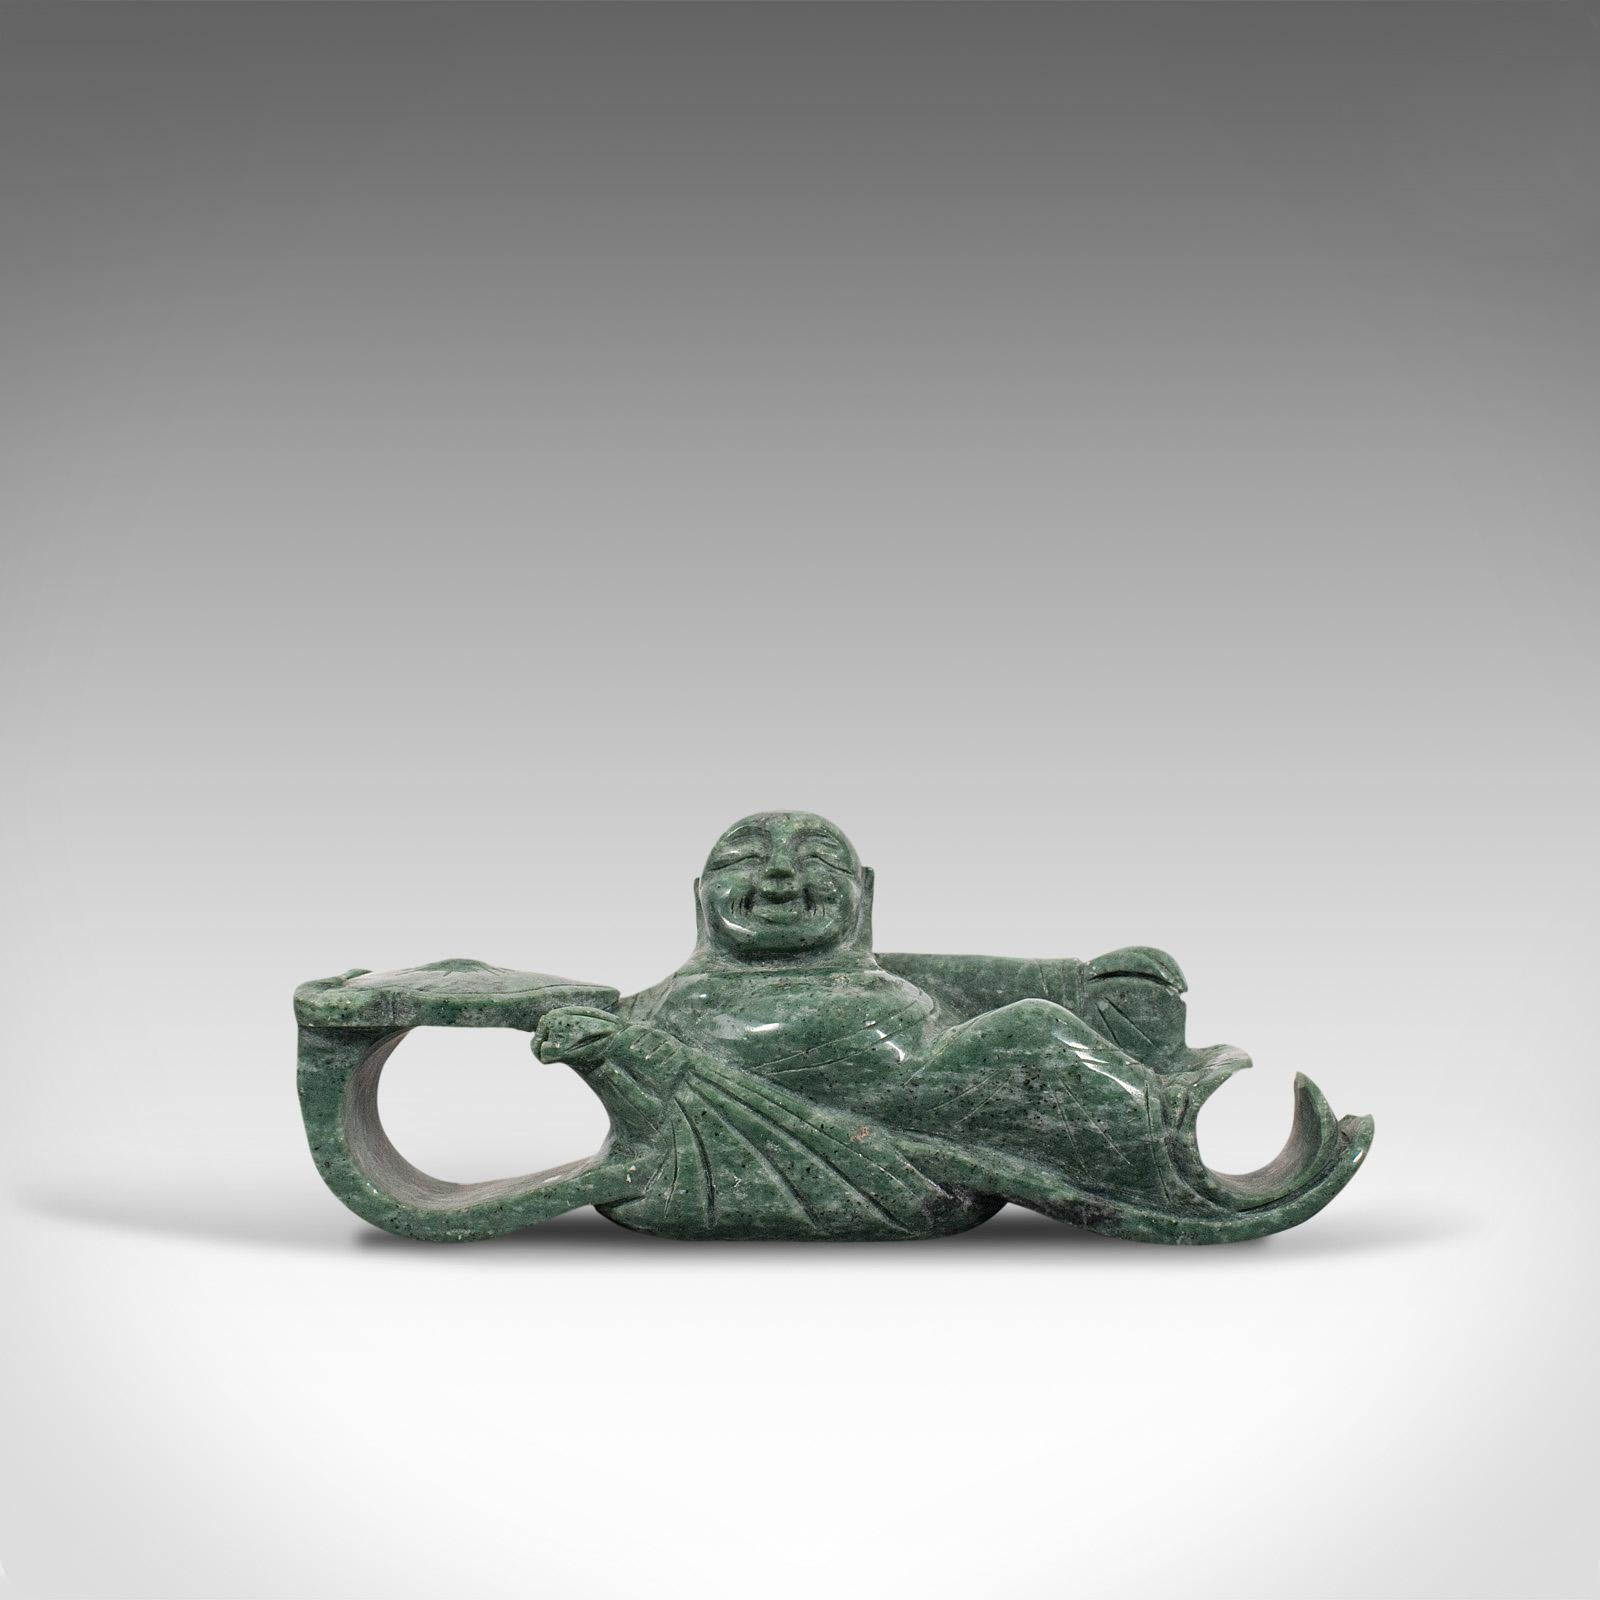 This is an antique Ruyi belt hook. An Oriental, jade marble buckle depicting a reclining Hotei or Budai, dating to the late 19th century, circa 1900.

Pleasingly decorative example of Oriental craftsmanship
Displaying a desirable aged